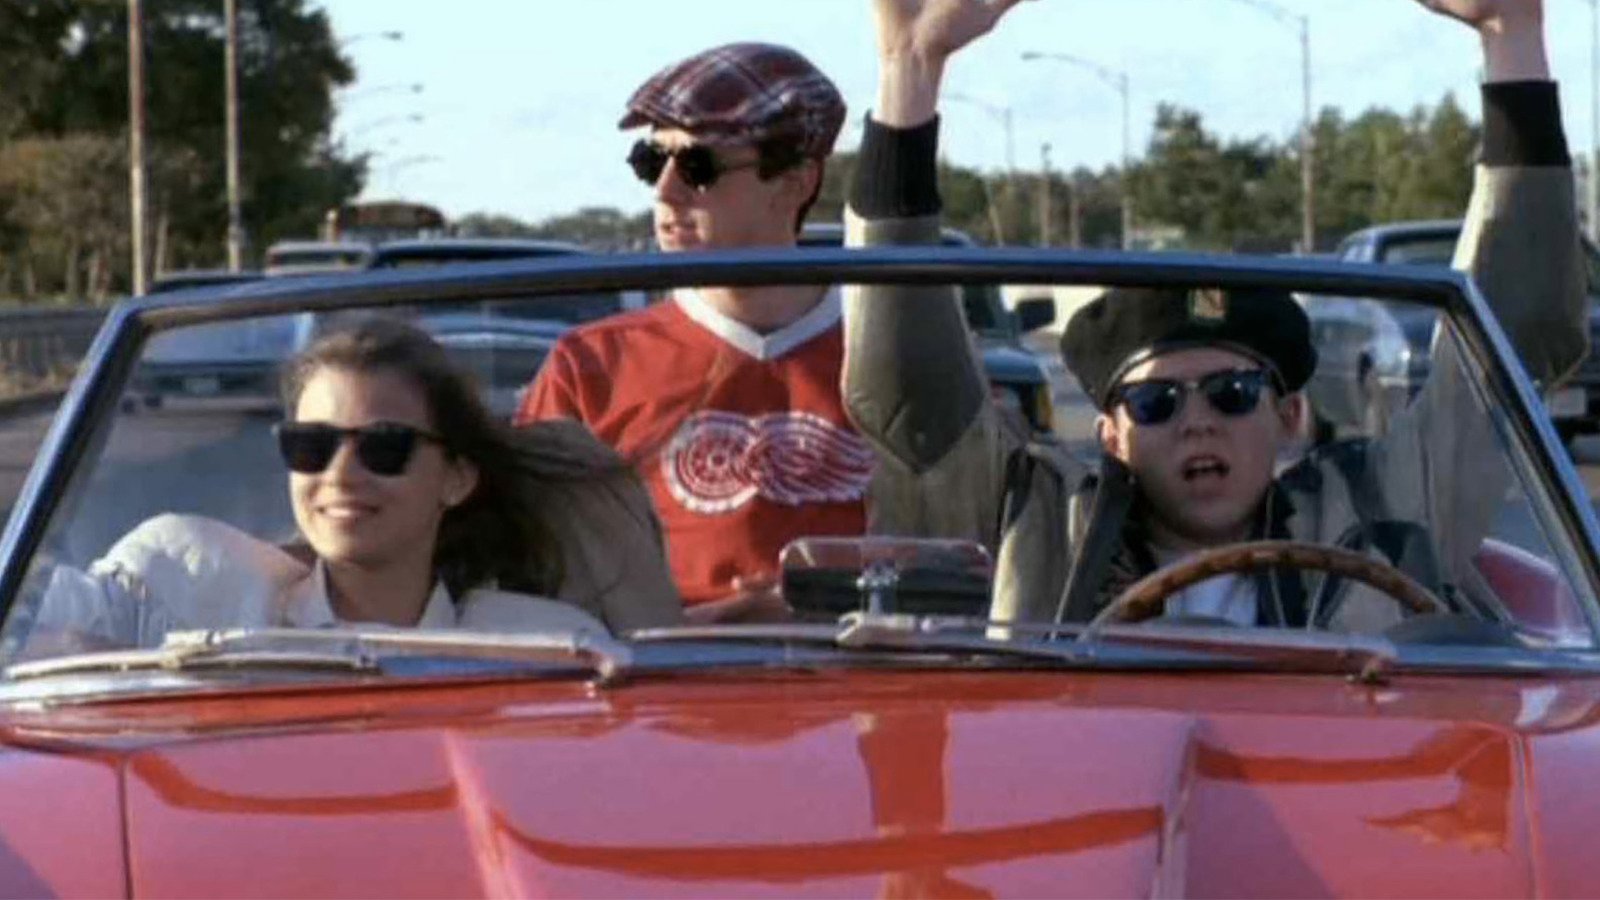 Every License Plate In Ferris Bueller's Day Off Has Meaning